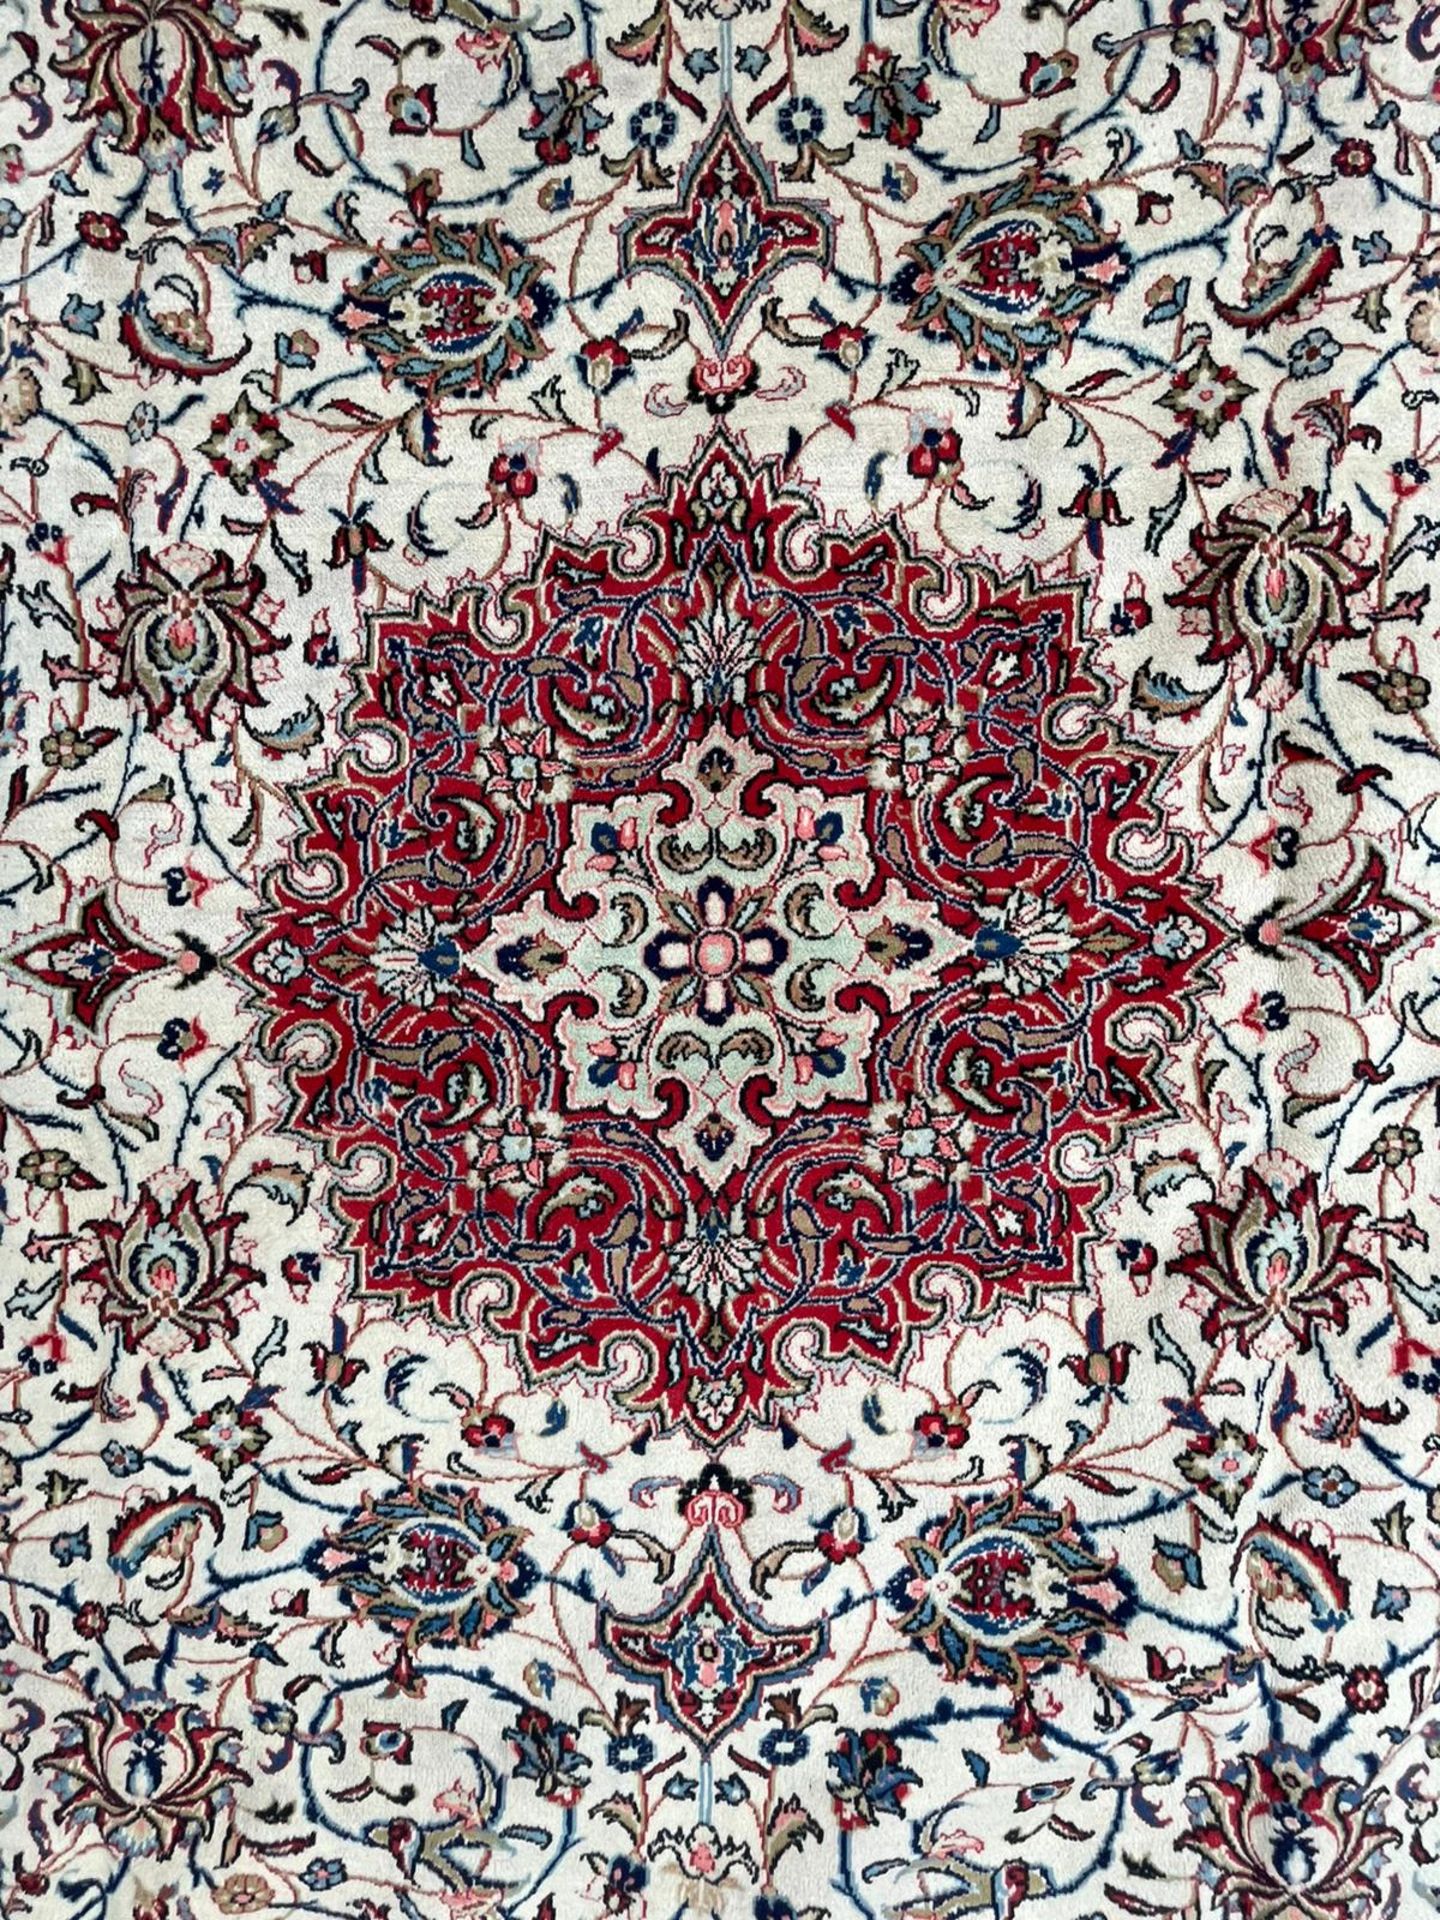 EARLY 20TH CENTURY NORTH WEST PERSIAN SAROUK FLOOR CARPET - Image 2 of 7